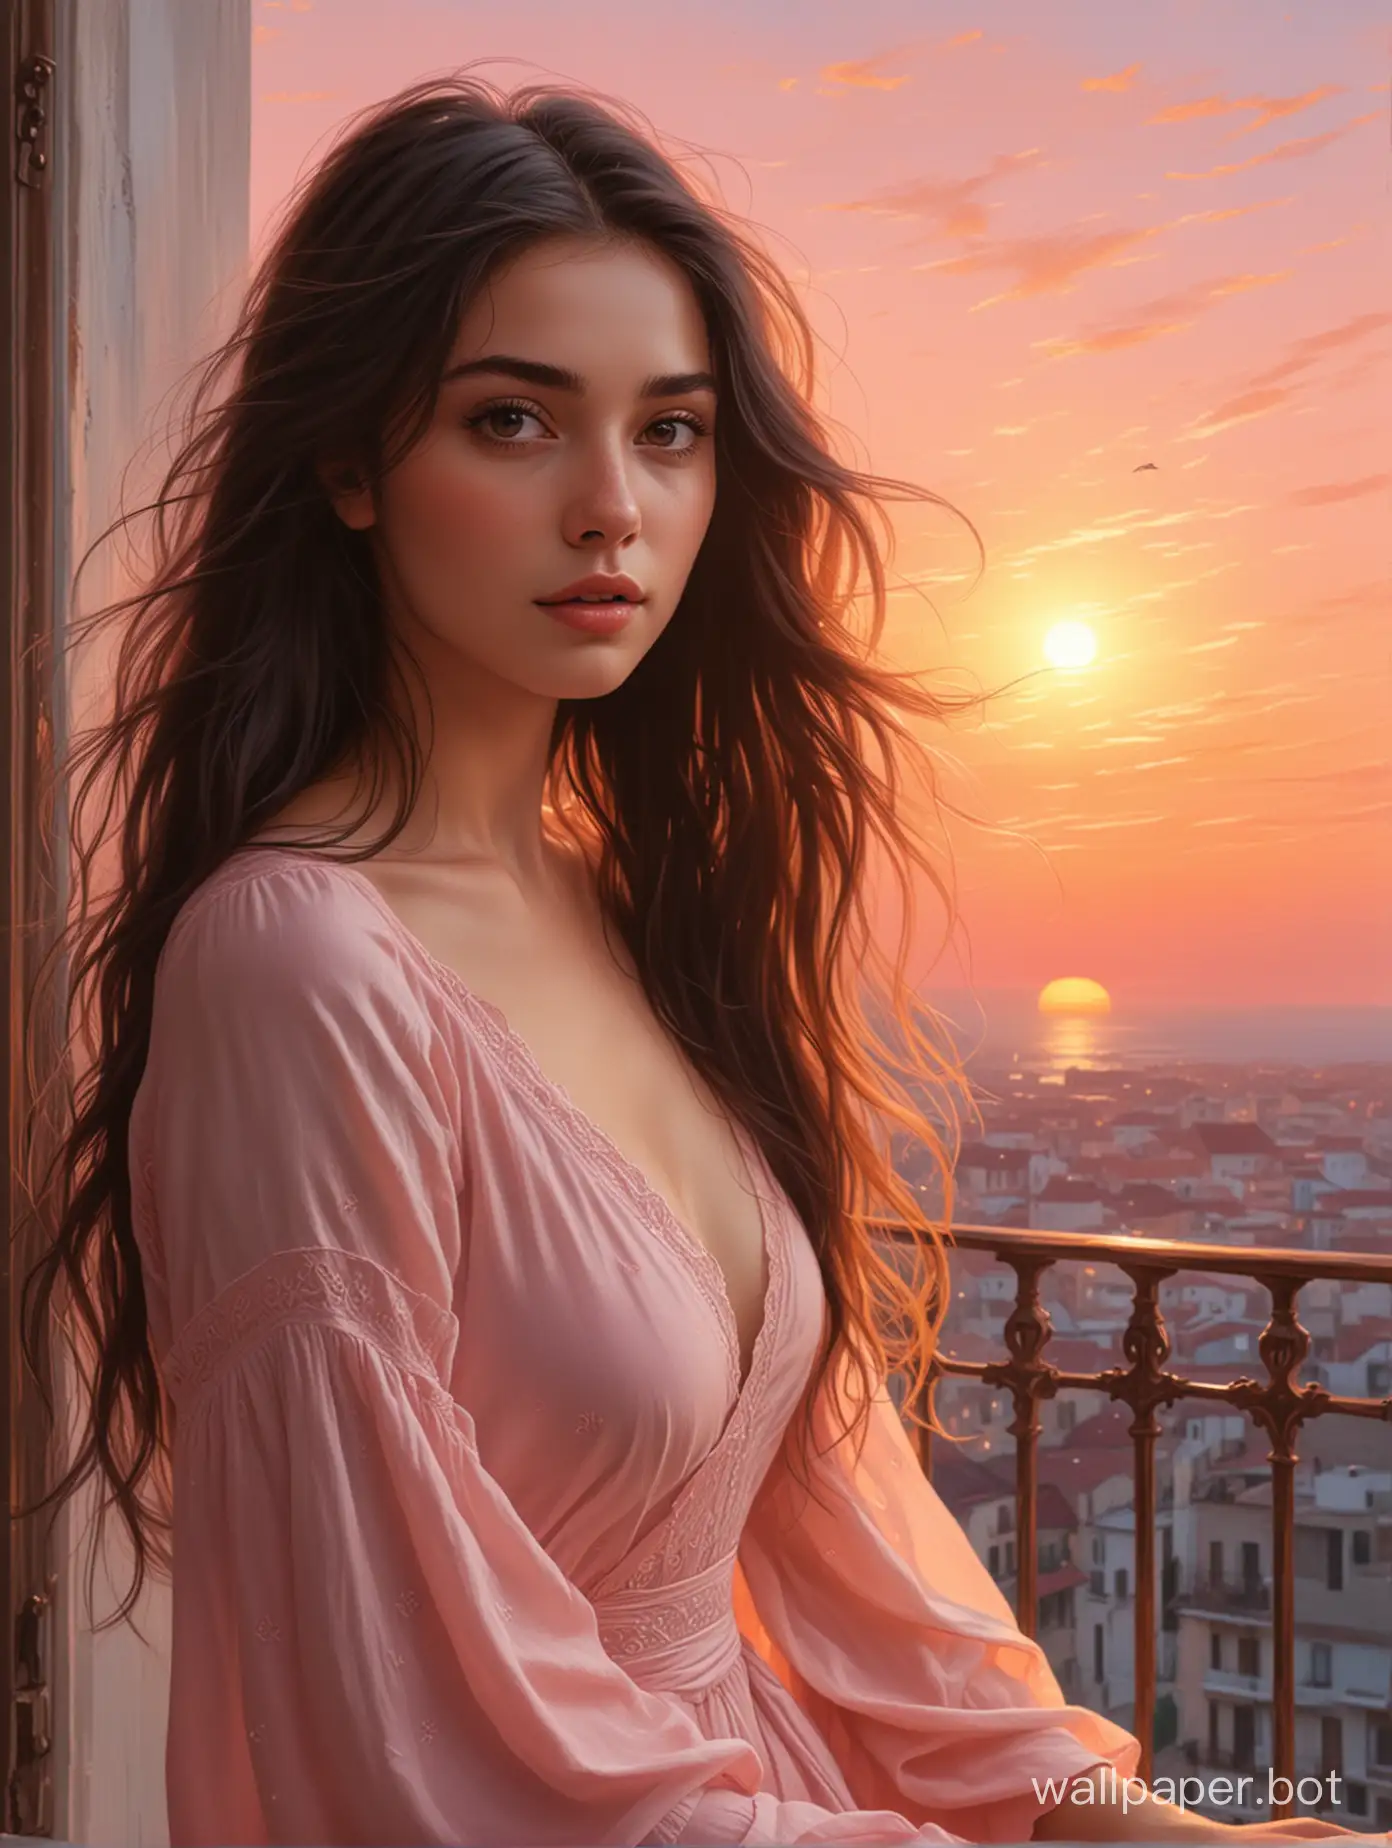 On the cover of the book is depicted a beautiful young woman with dark long hair that easily sways in the wind. She stands on the balcony, engulfed in the first rays of dawn. Tenderness and mystery are reflected in her eyes, while her gaze is filled with secrecy and dreams. The background of the cover is dark, with only a delicate pink sky visible on the horizon, painted in the colors of the rising sun. This image symbolizes the beginning of a new day and new opportunities for the main heroine, who has immersed herself in the magical atmosphere of dawn at this moment.